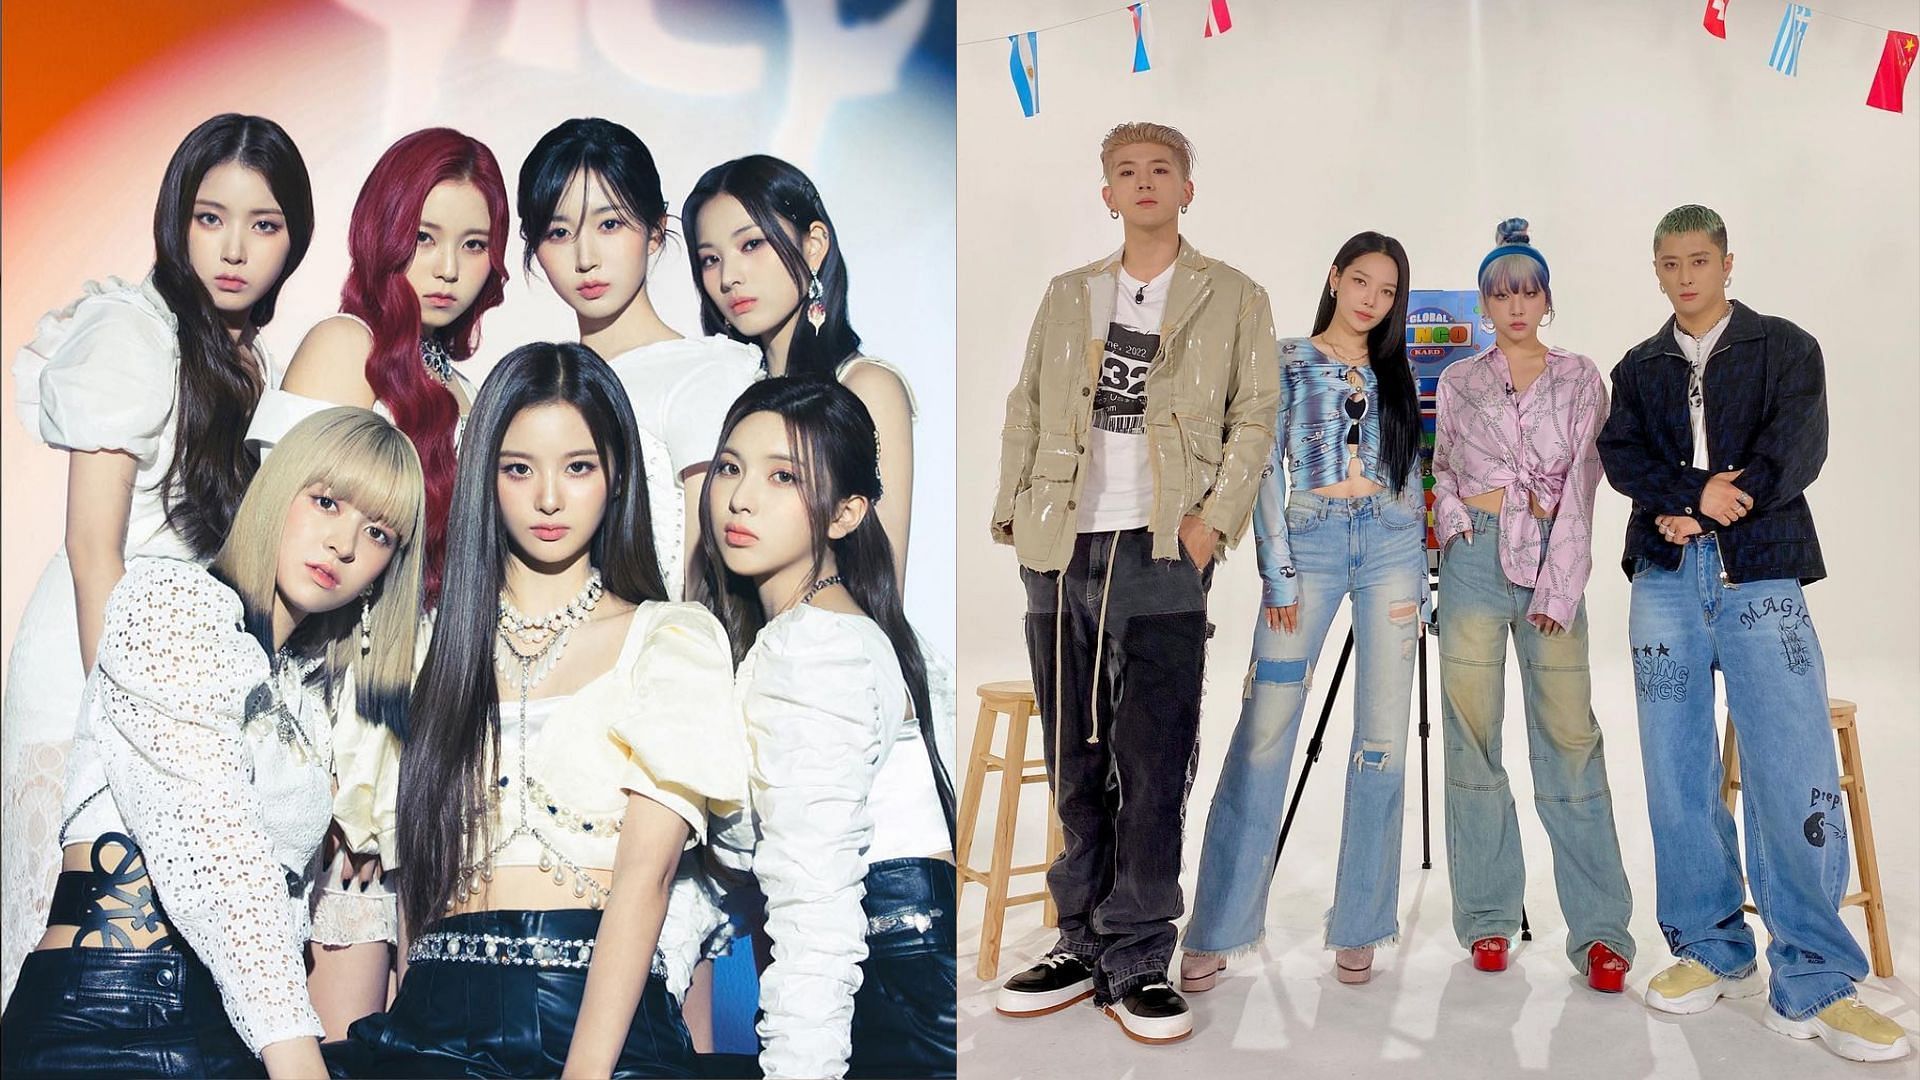 NMIXX and KARD are some of the artists confirmed to attend the 2022 AAA (Images via Instagram/nmixx_official and official_kard)